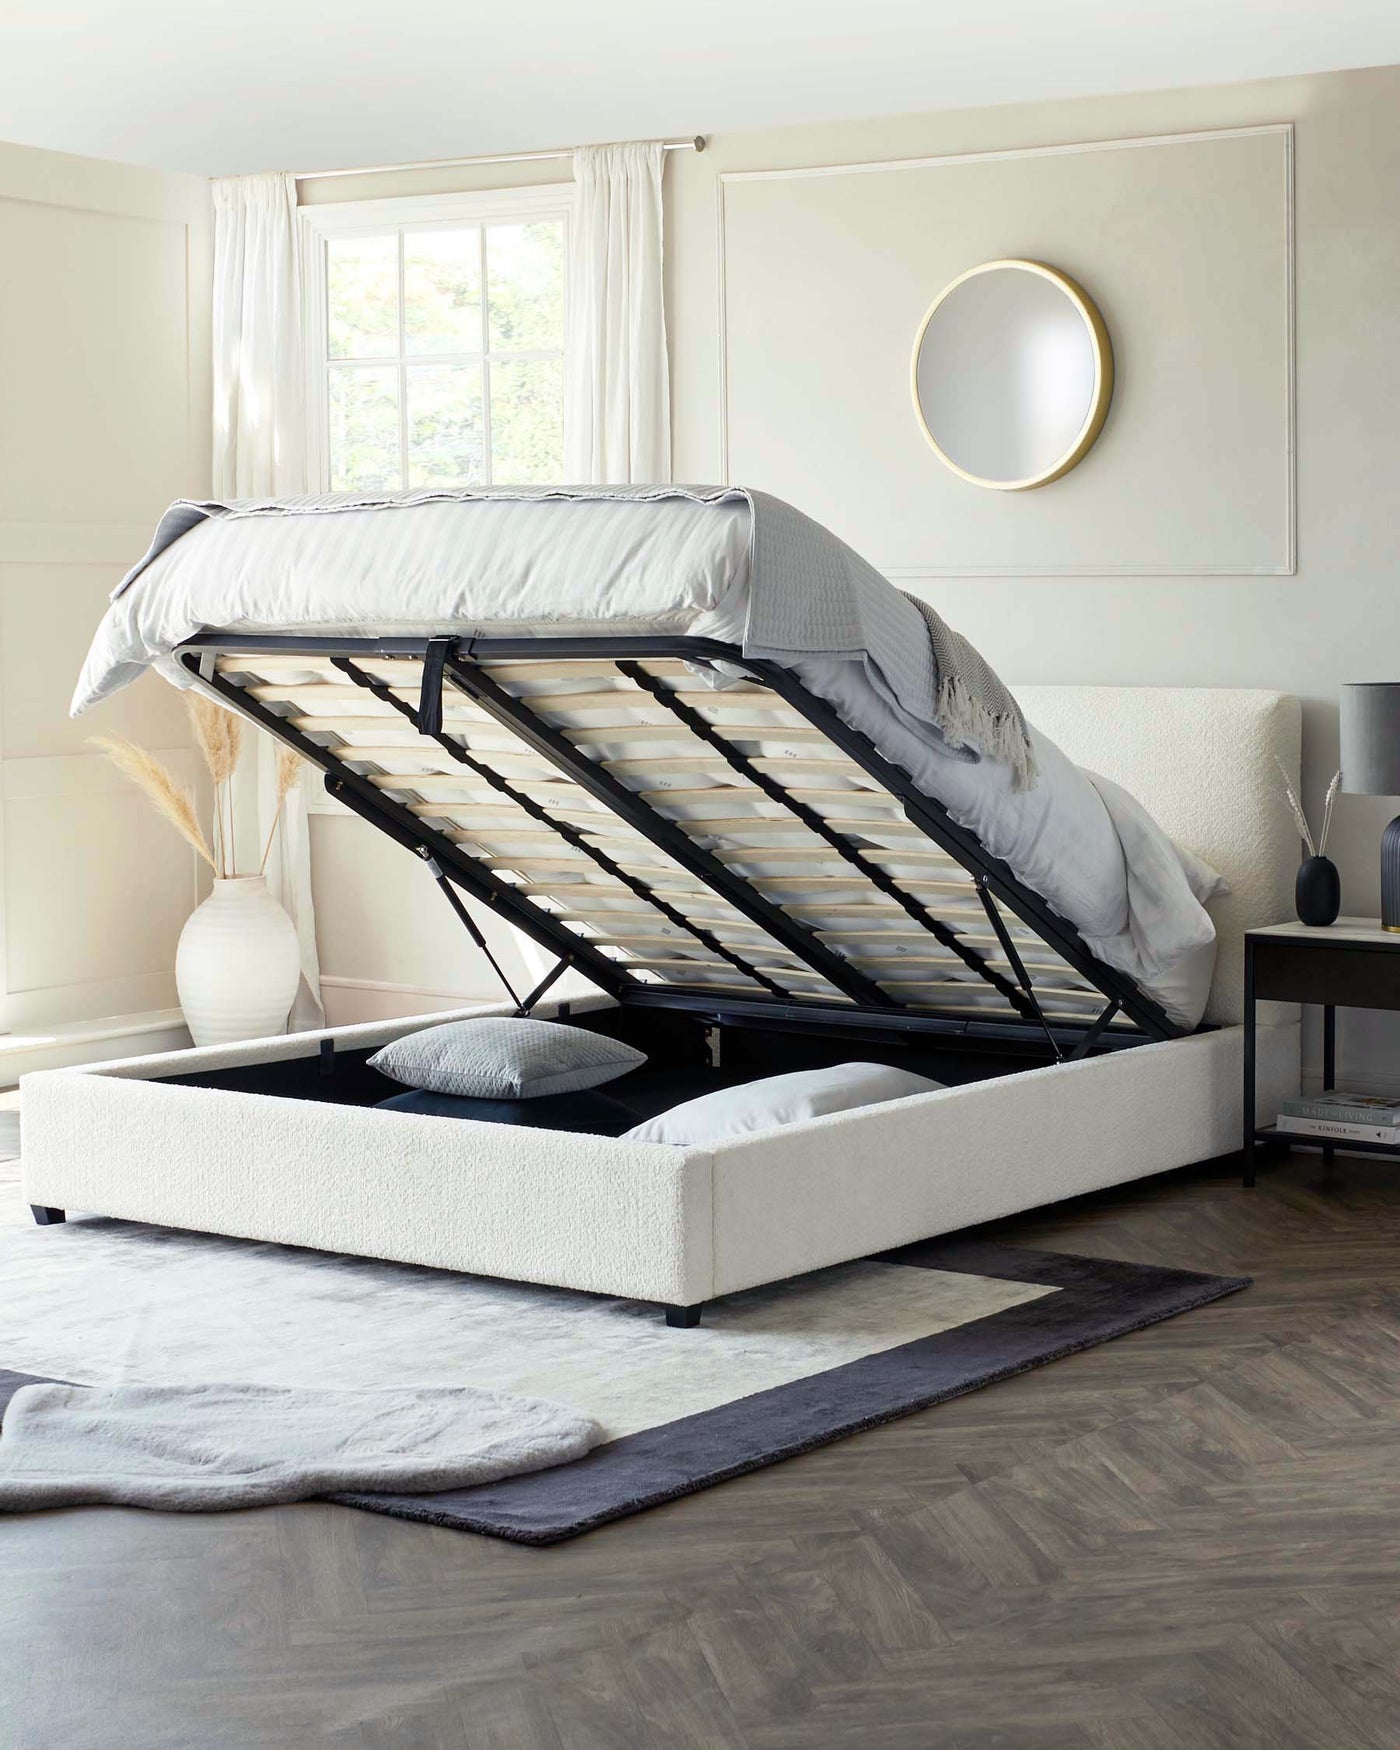 Modern upholstered storage bed with a gas-lift mechanism revealing ample space beneath the slatted mattress support, complemented by a textured off-white finish.